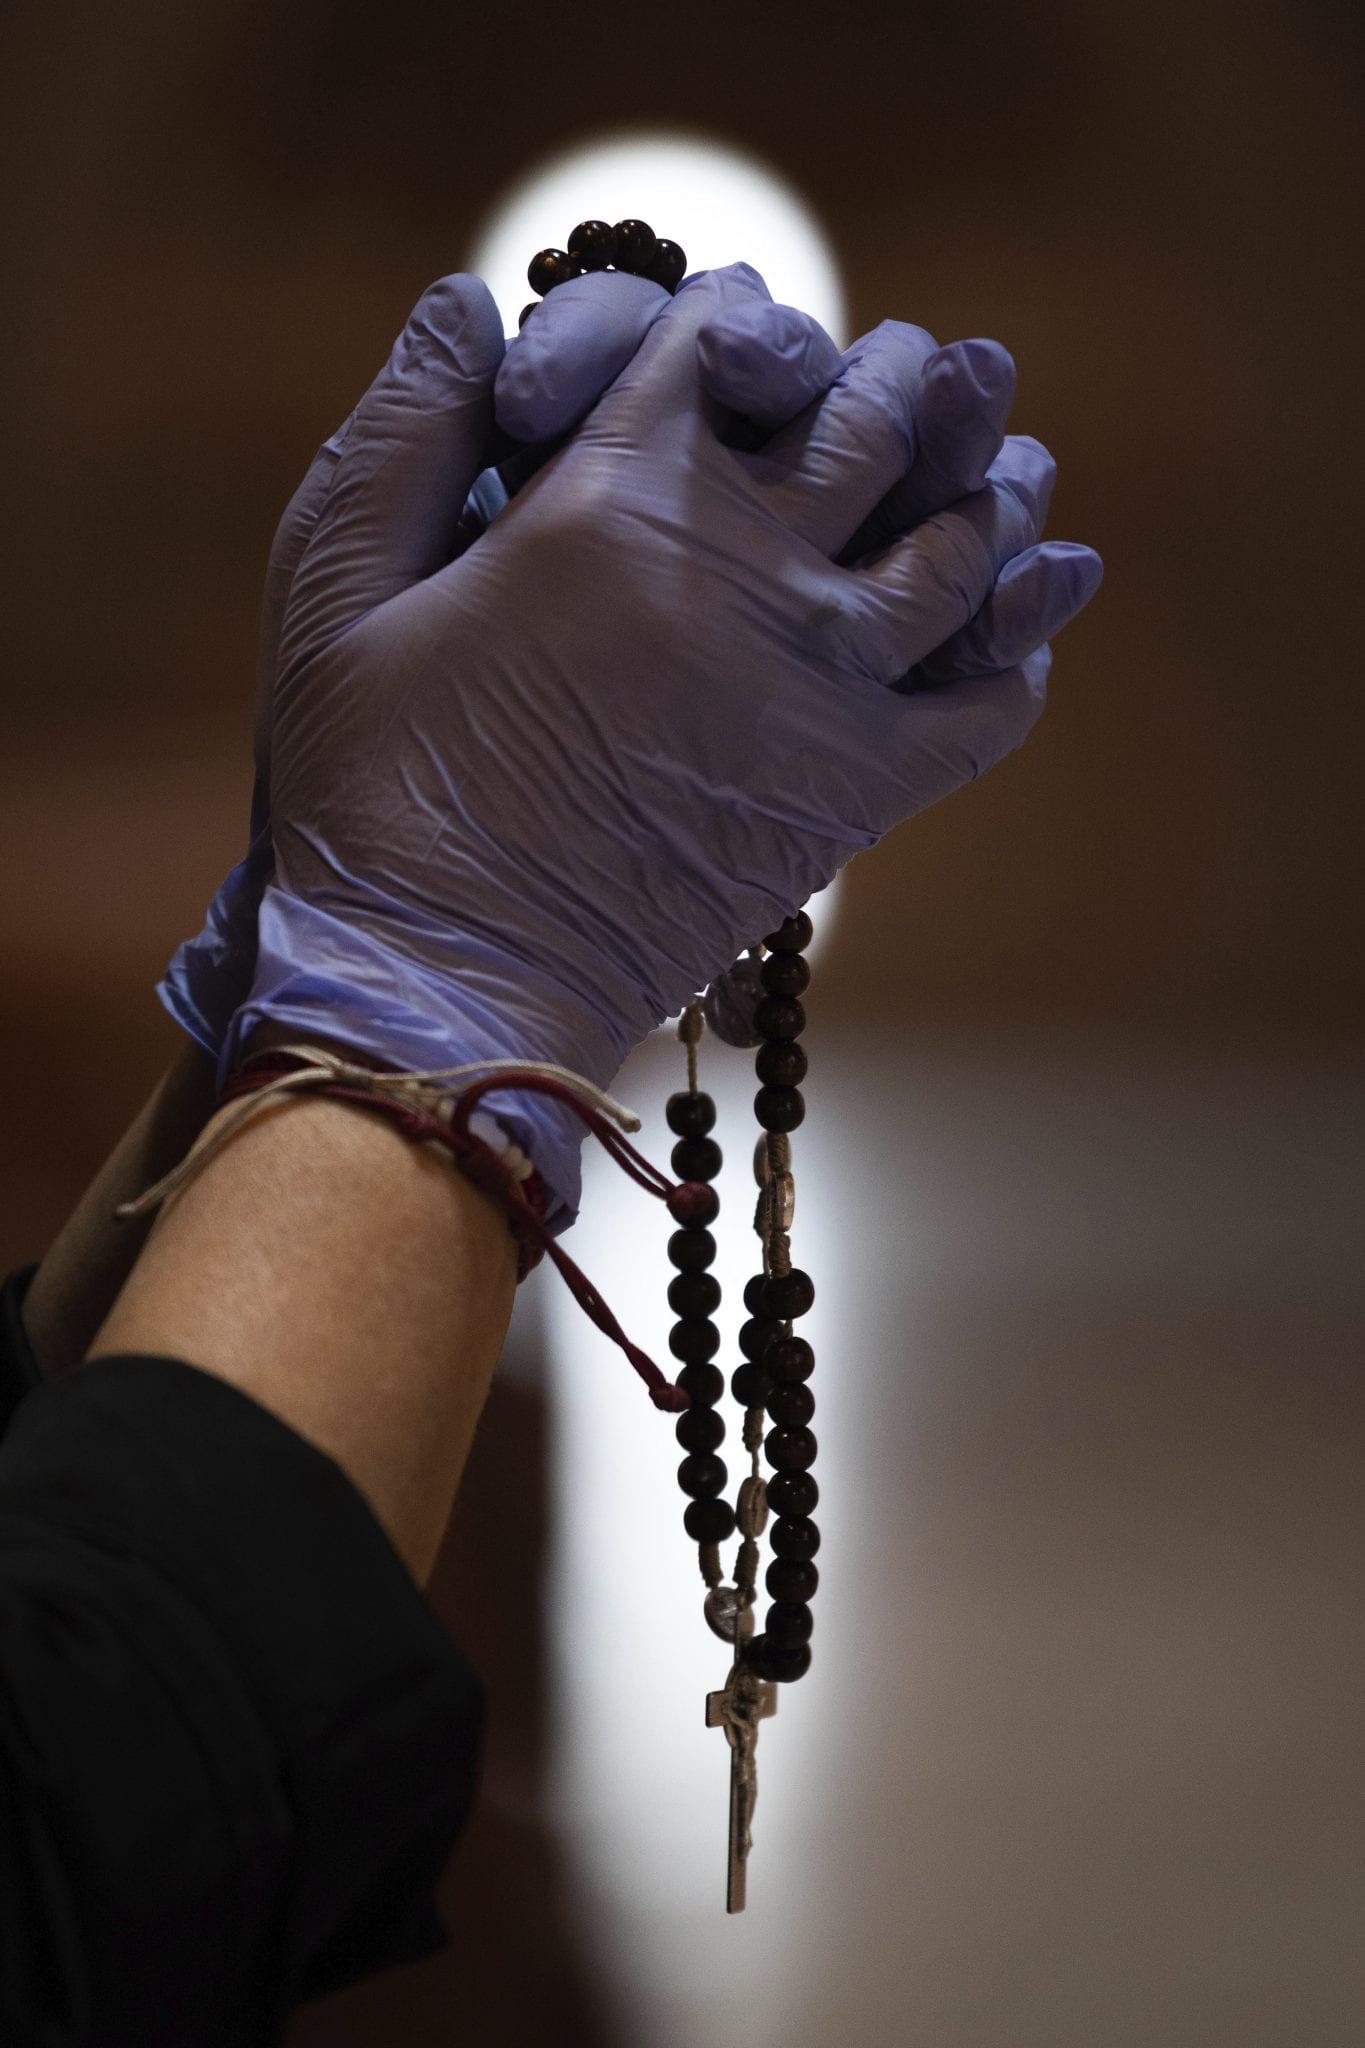 Pope urges families to pray rosary together during month of May